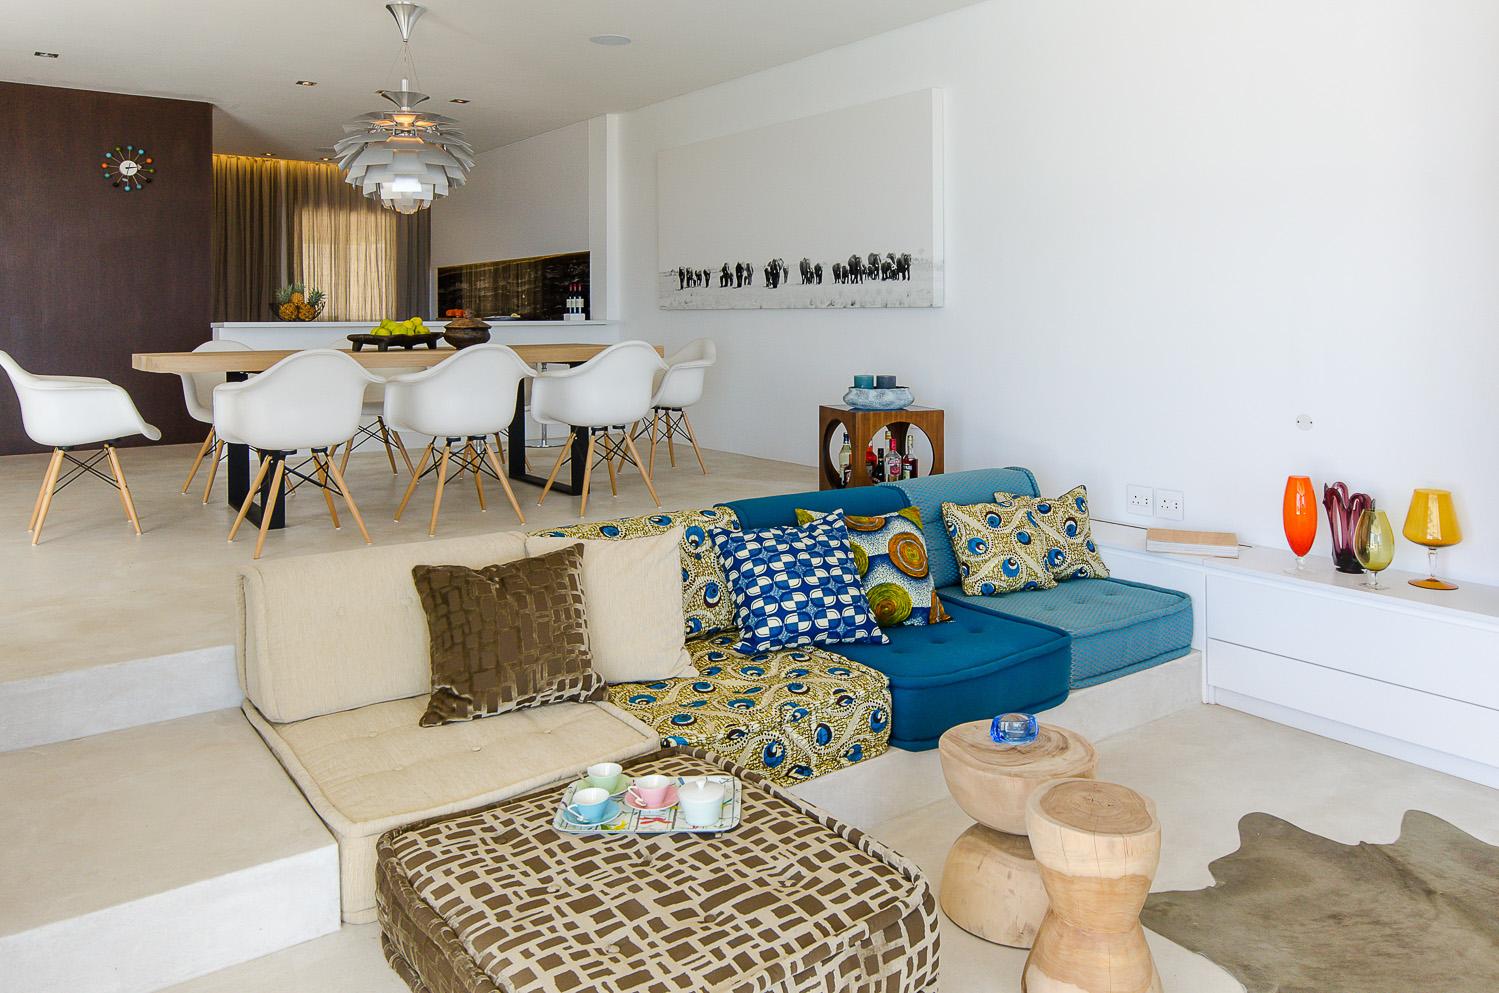 Photo 15 of Strathmore Dream accommodation in Camps Bay, Cape Town with 4 bedrooms and 3 bathrooms